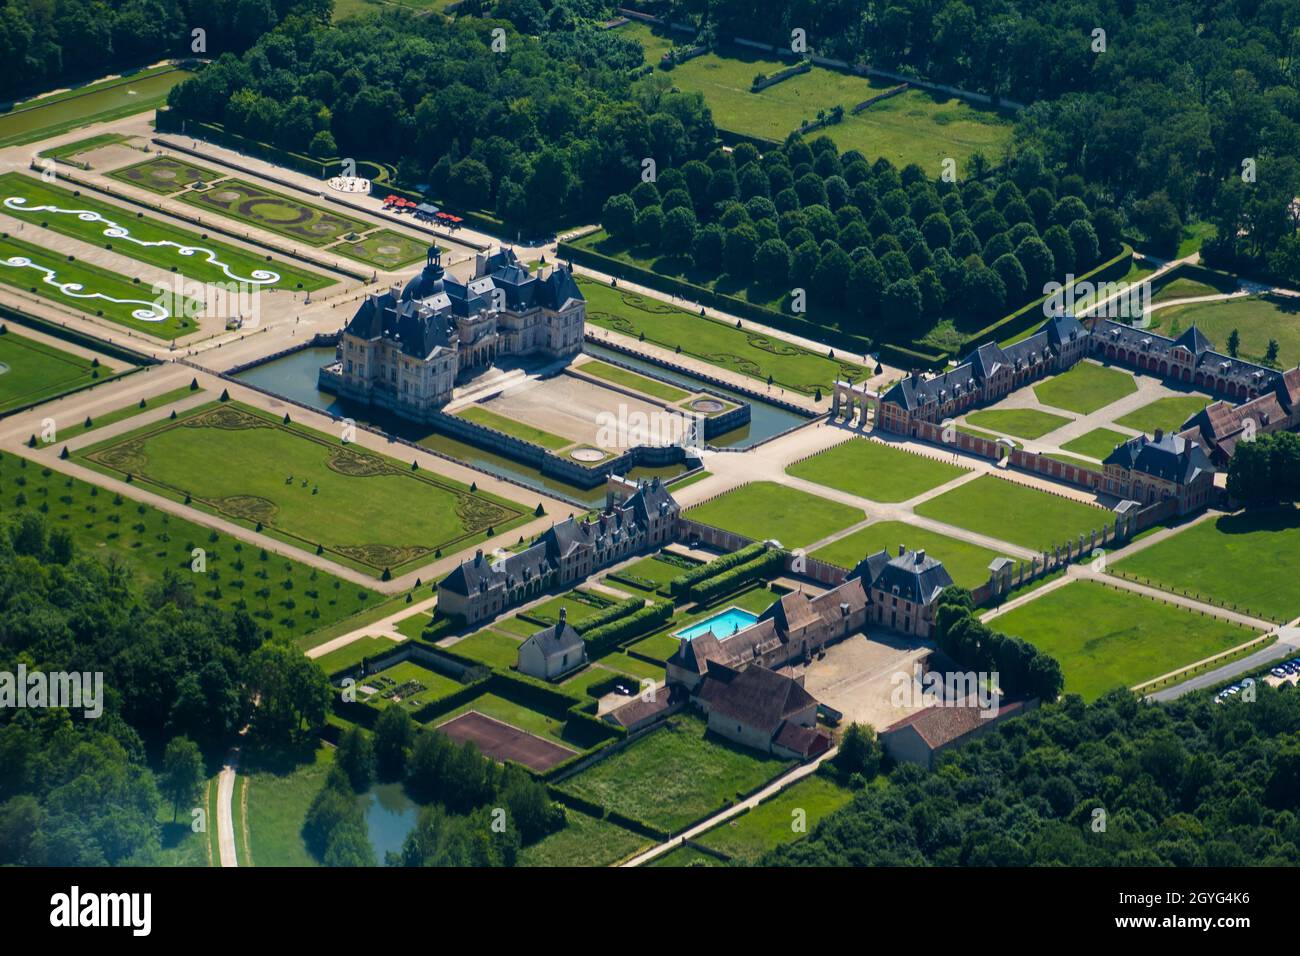 Aerial view of the castle and stables of Vaux le Vicomte near Paris and Melun in Seine et Marne, France - Classic palace built by Nicolas Fouquet, sup Stock Photo